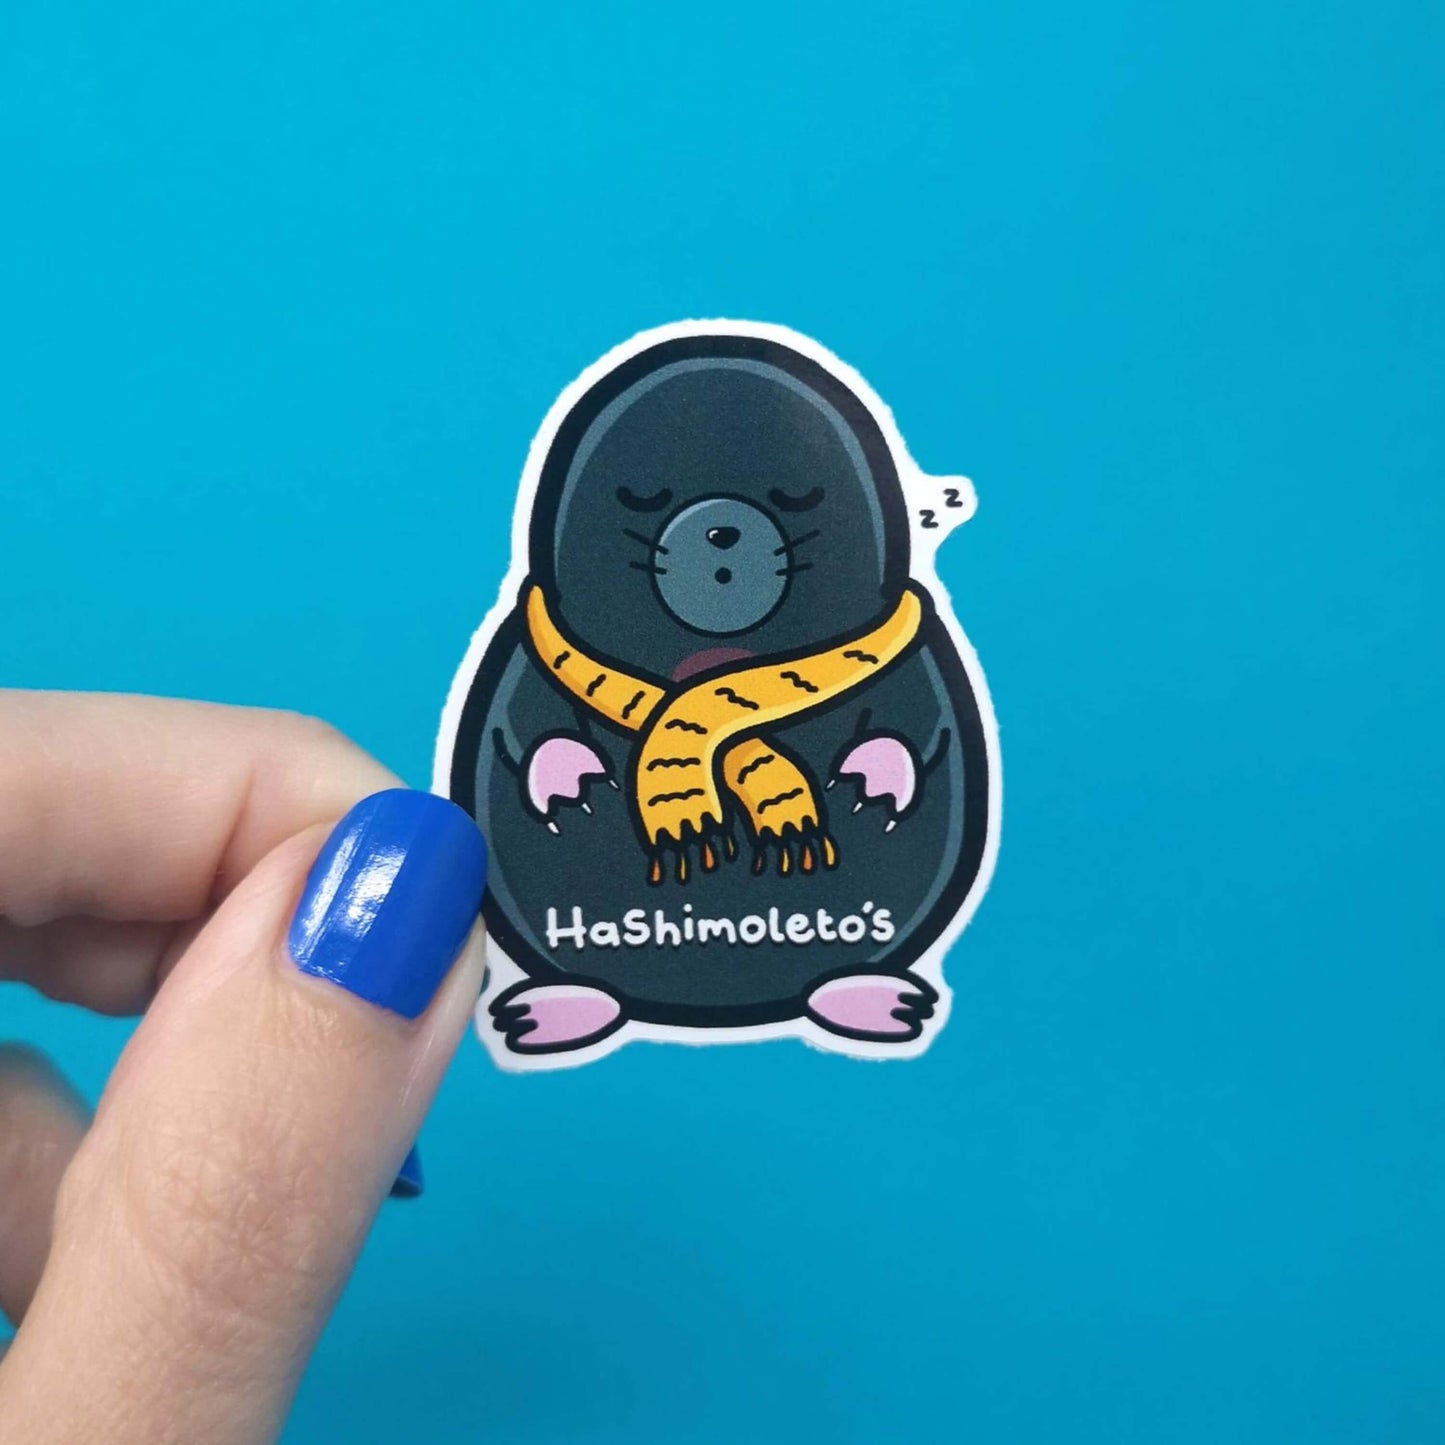 A sticker of a small grey mole looking sleepy wearing a yellow scarf it has text saying hashimoletos on its lower body. It is being held over a blue background for size reference. The hand drawn design is raising awareness for Hashimotos.